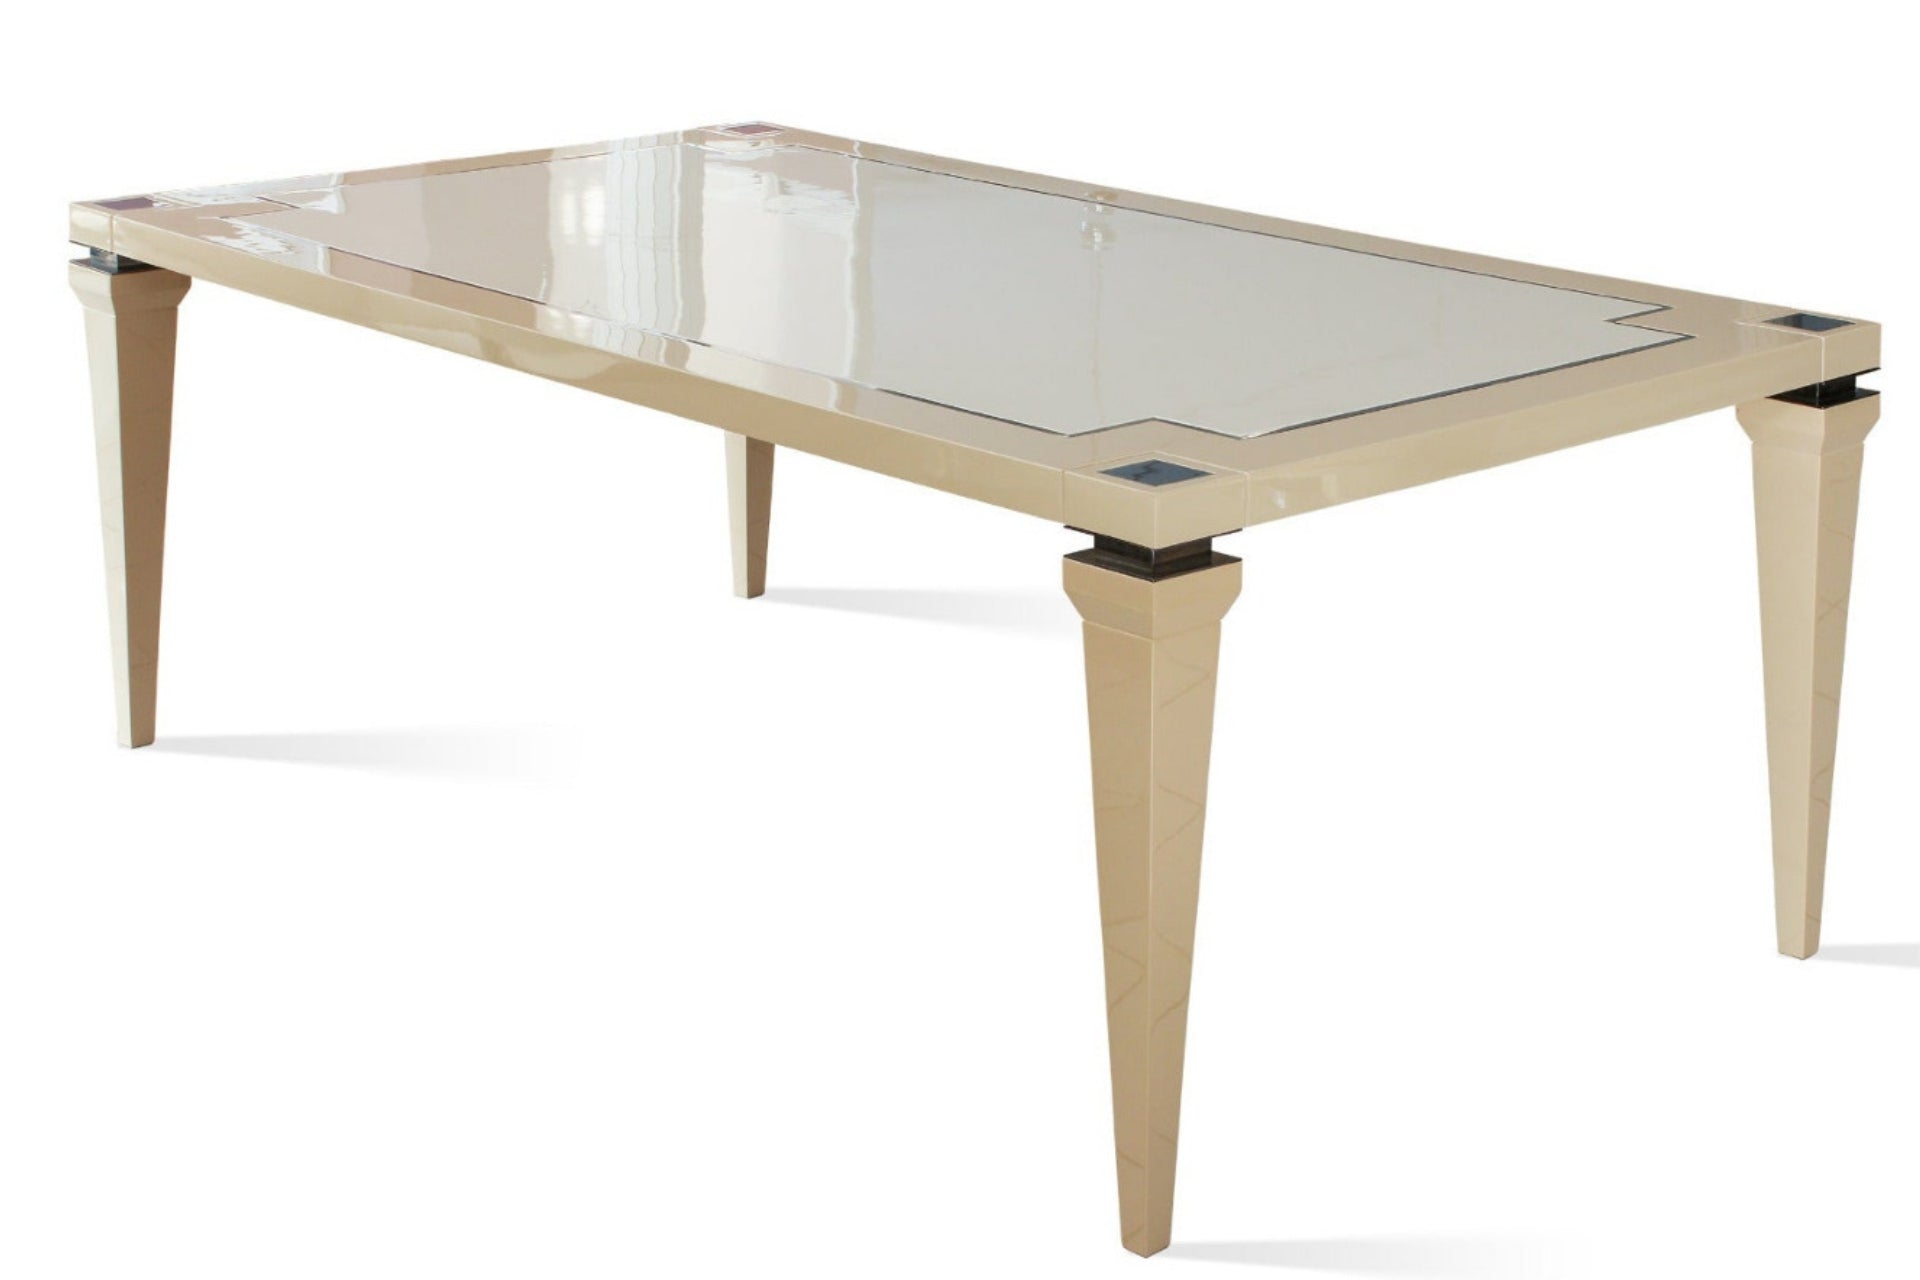 Dining table in gloss beige and ivory wood, with steel accents